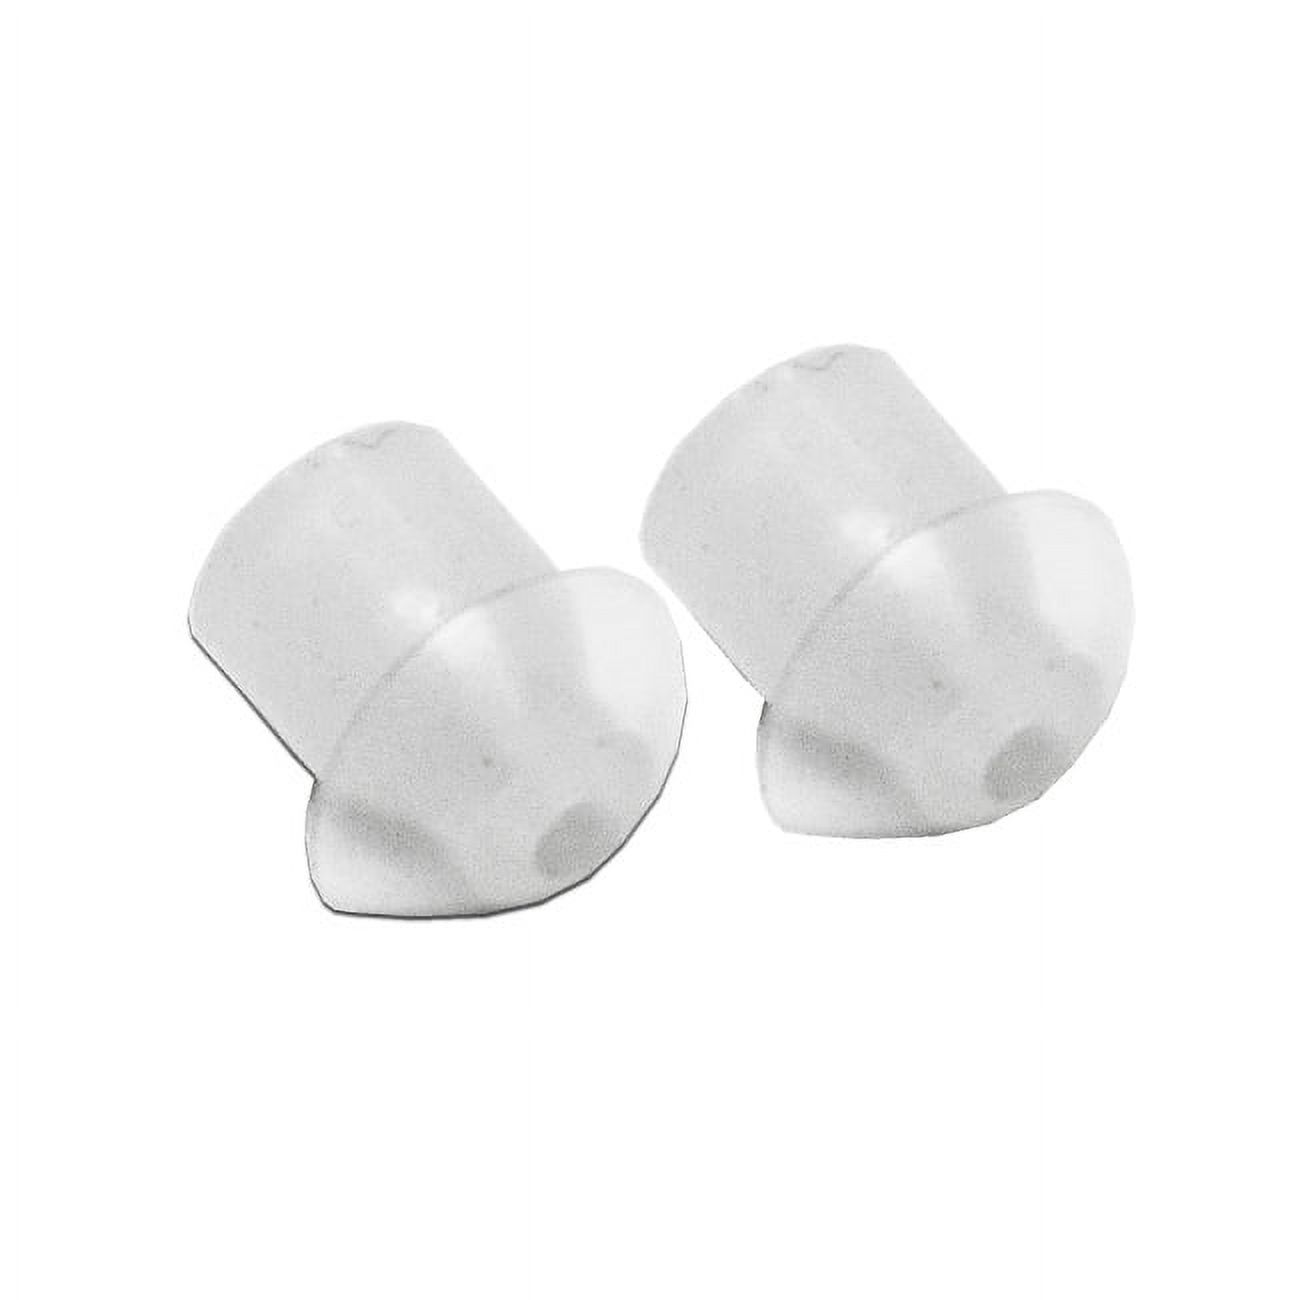 MaximalPower Clear Silicone Earpiece Ear Tip for Motorola Kenwood Two-Way Radio Headset - 10 Pack - image 2 of 2